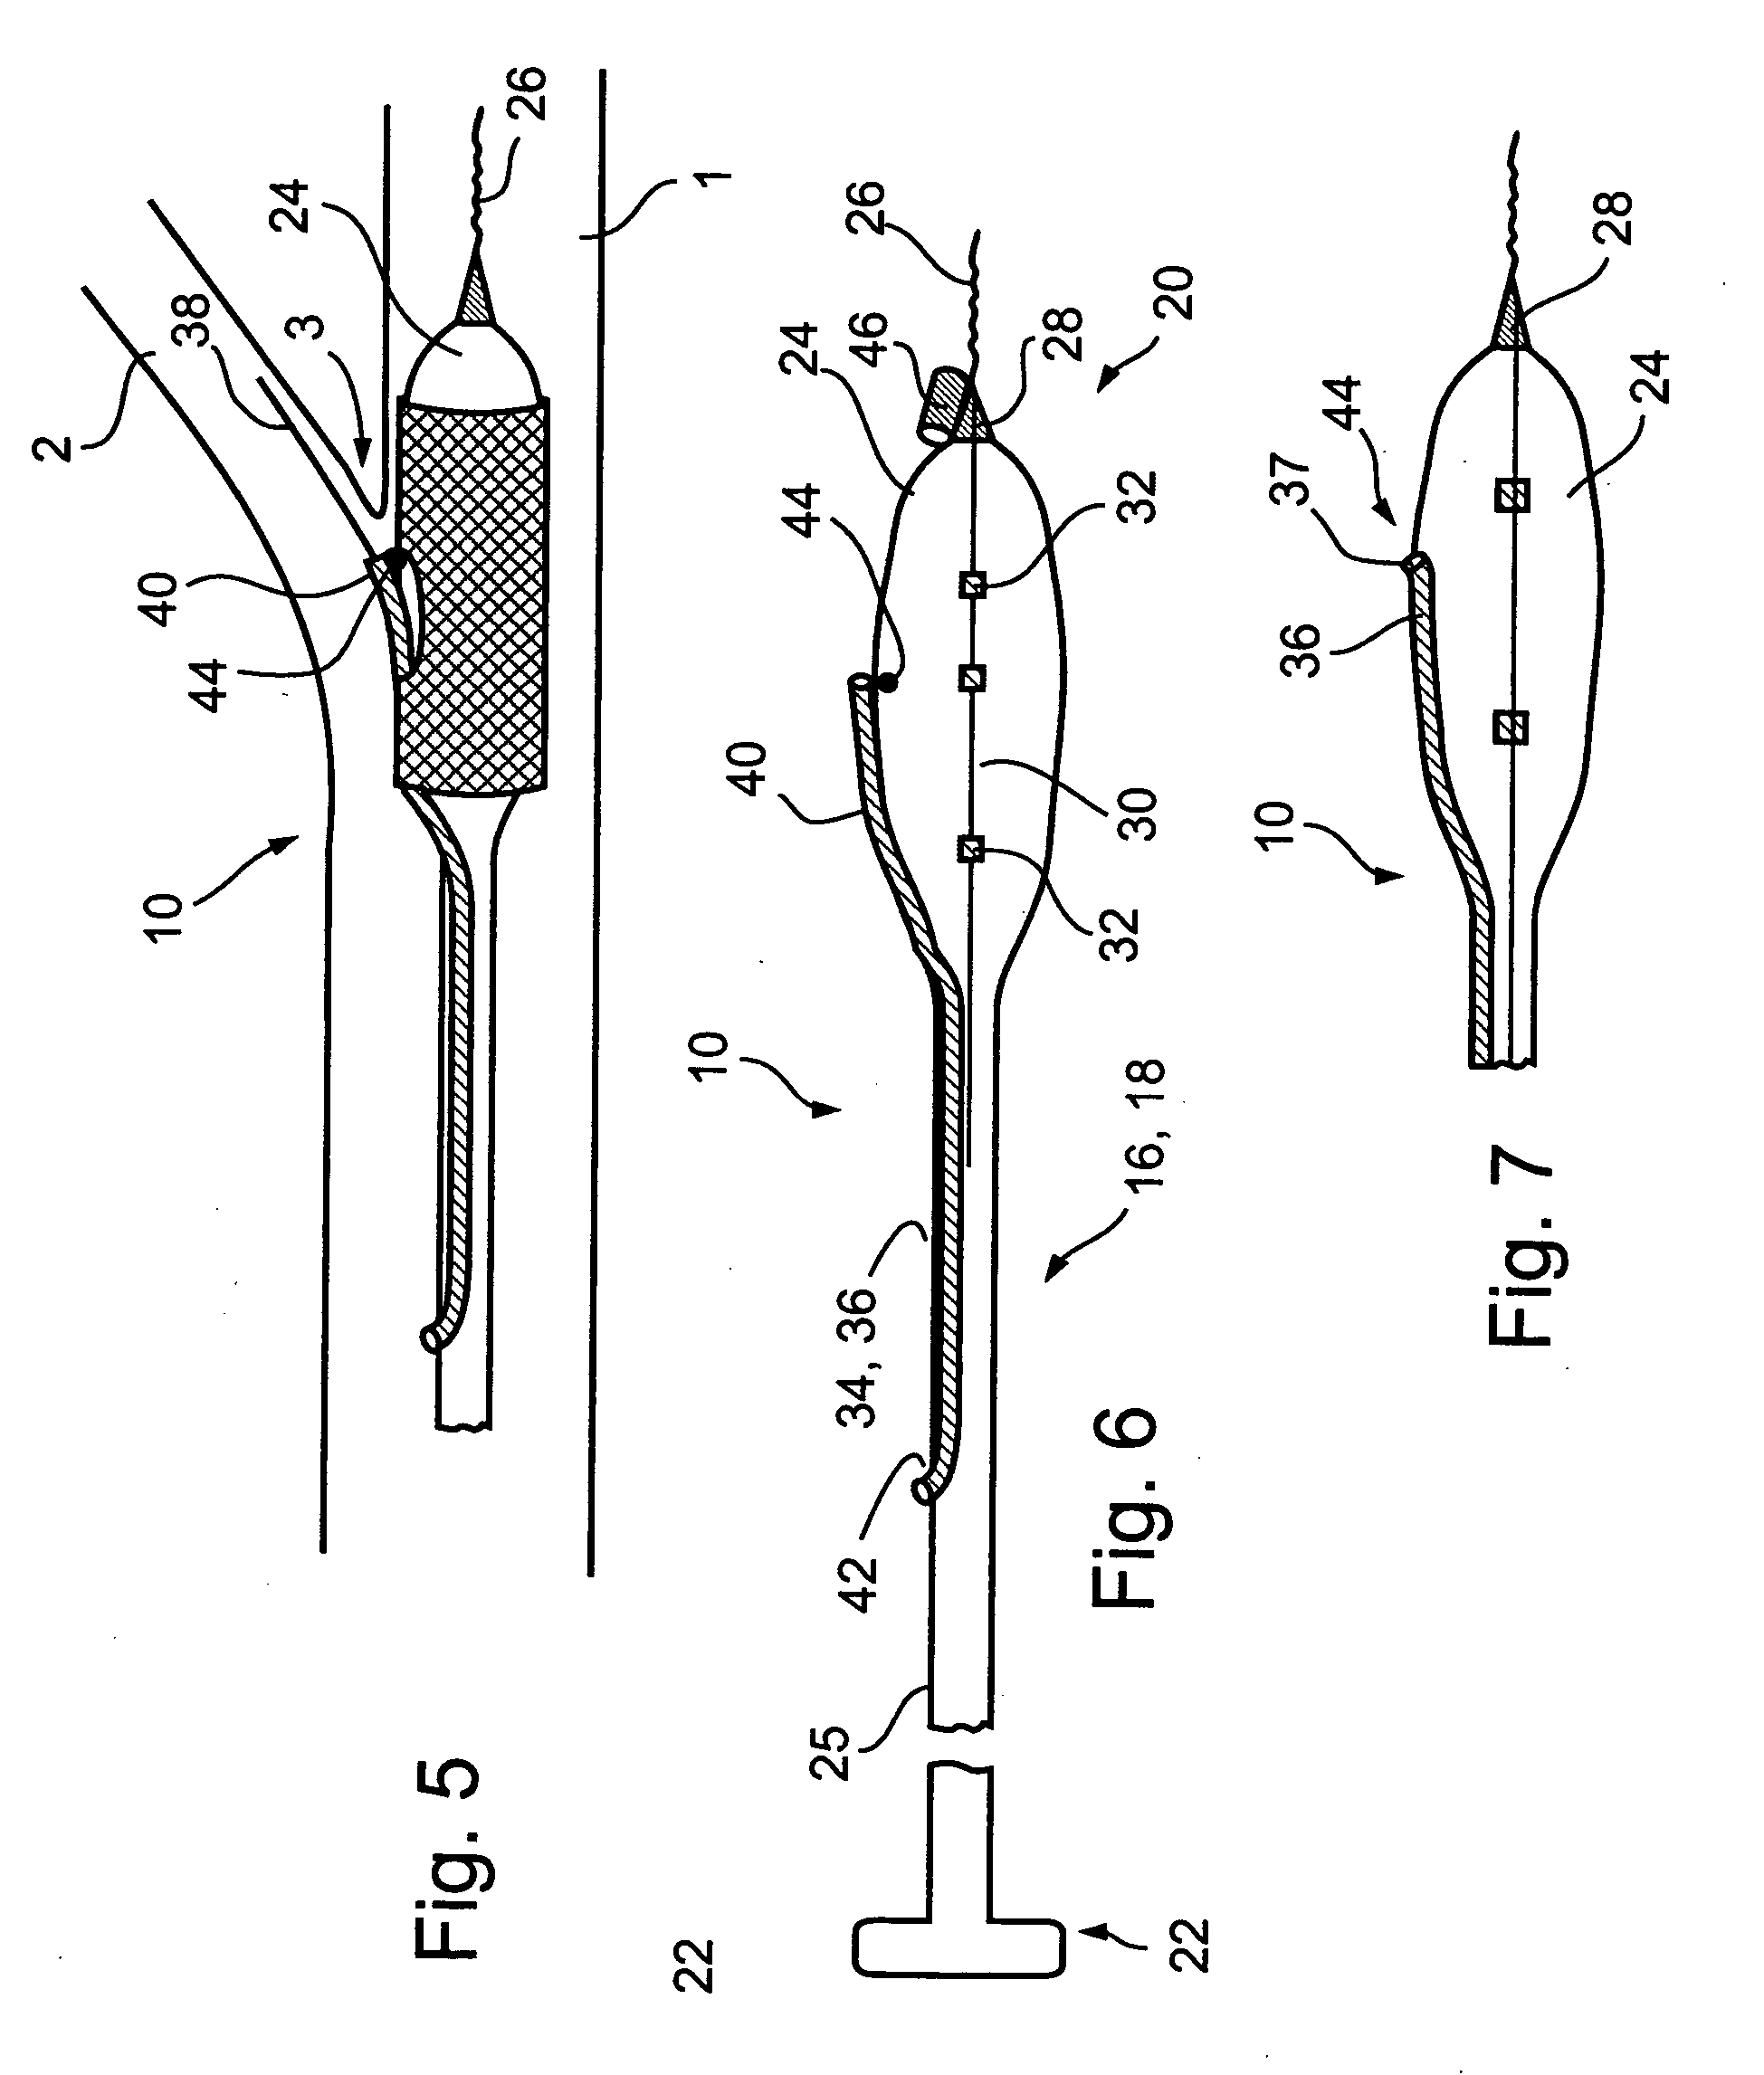 Bifurcation stent delivery devices